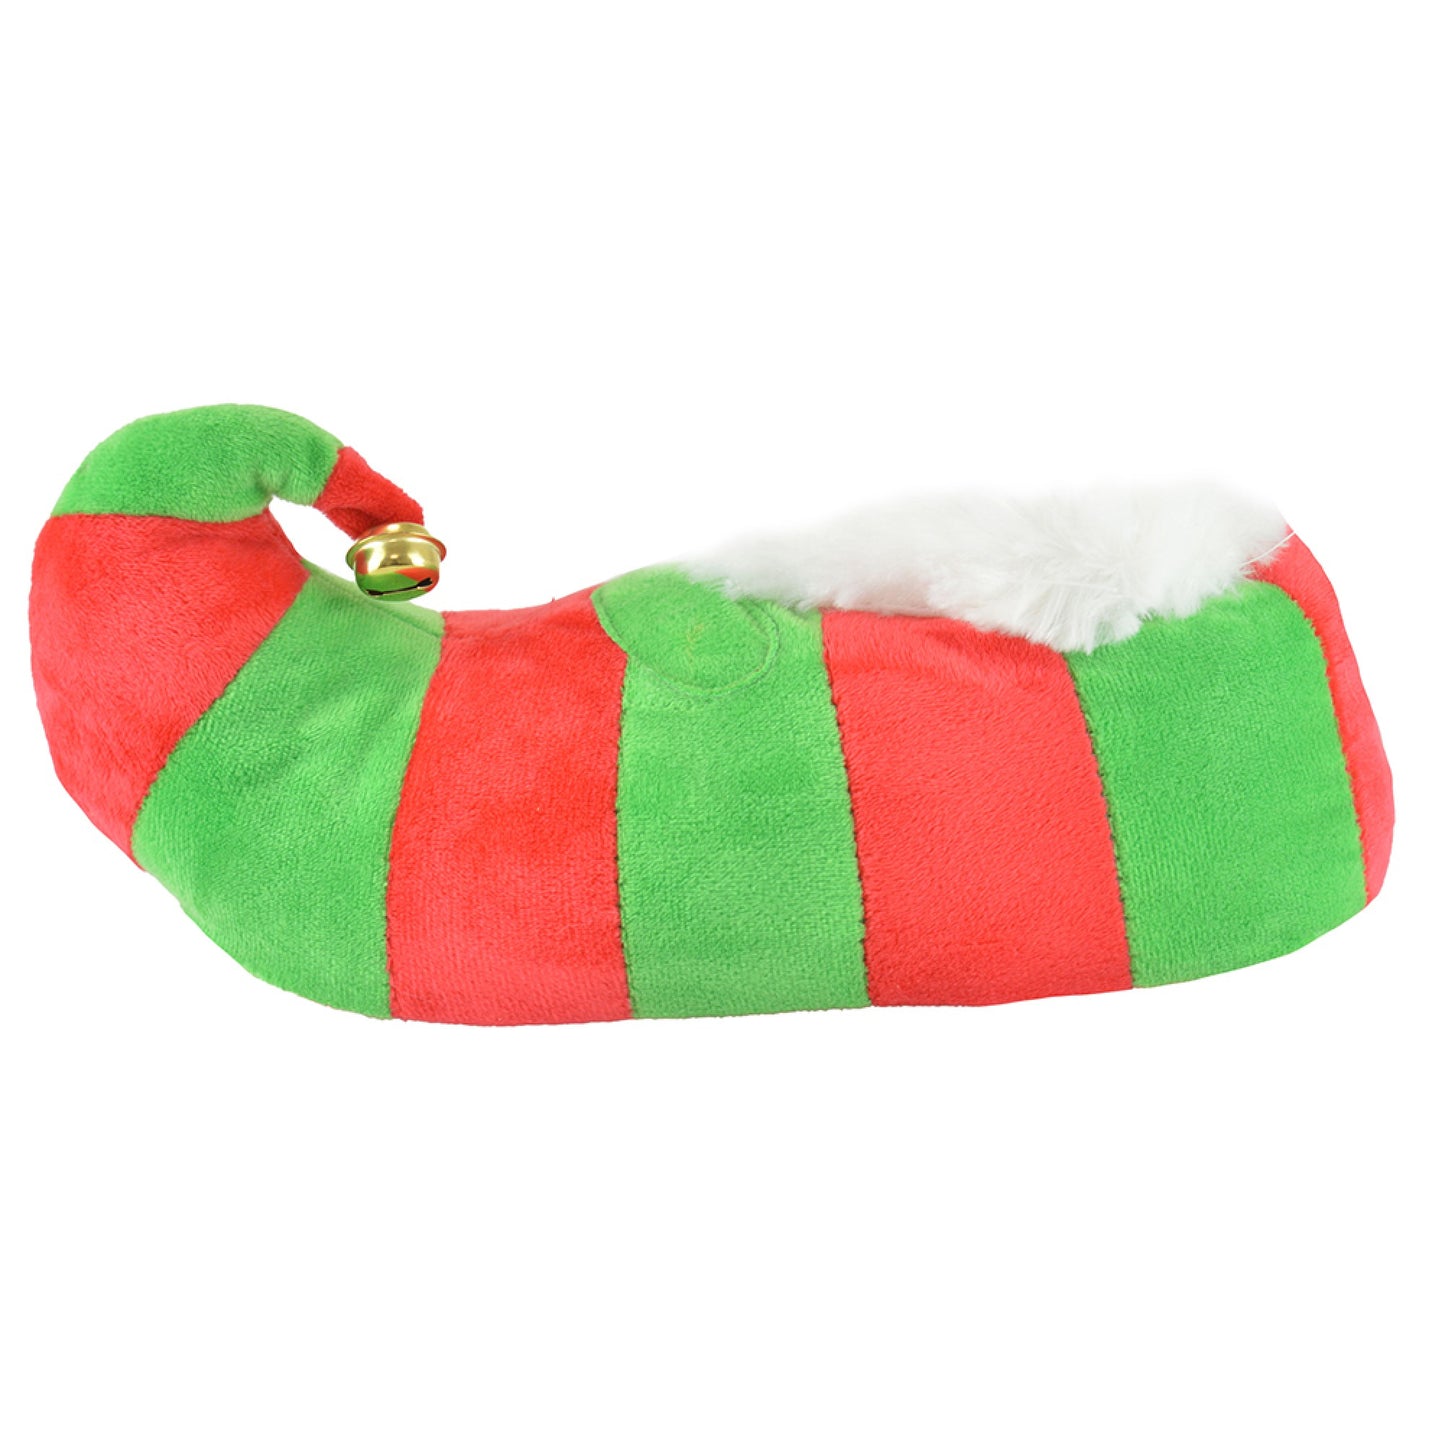 Ladies/Mens/Adults 3D Novelty Plush Christmas Elf Slippers with Bells